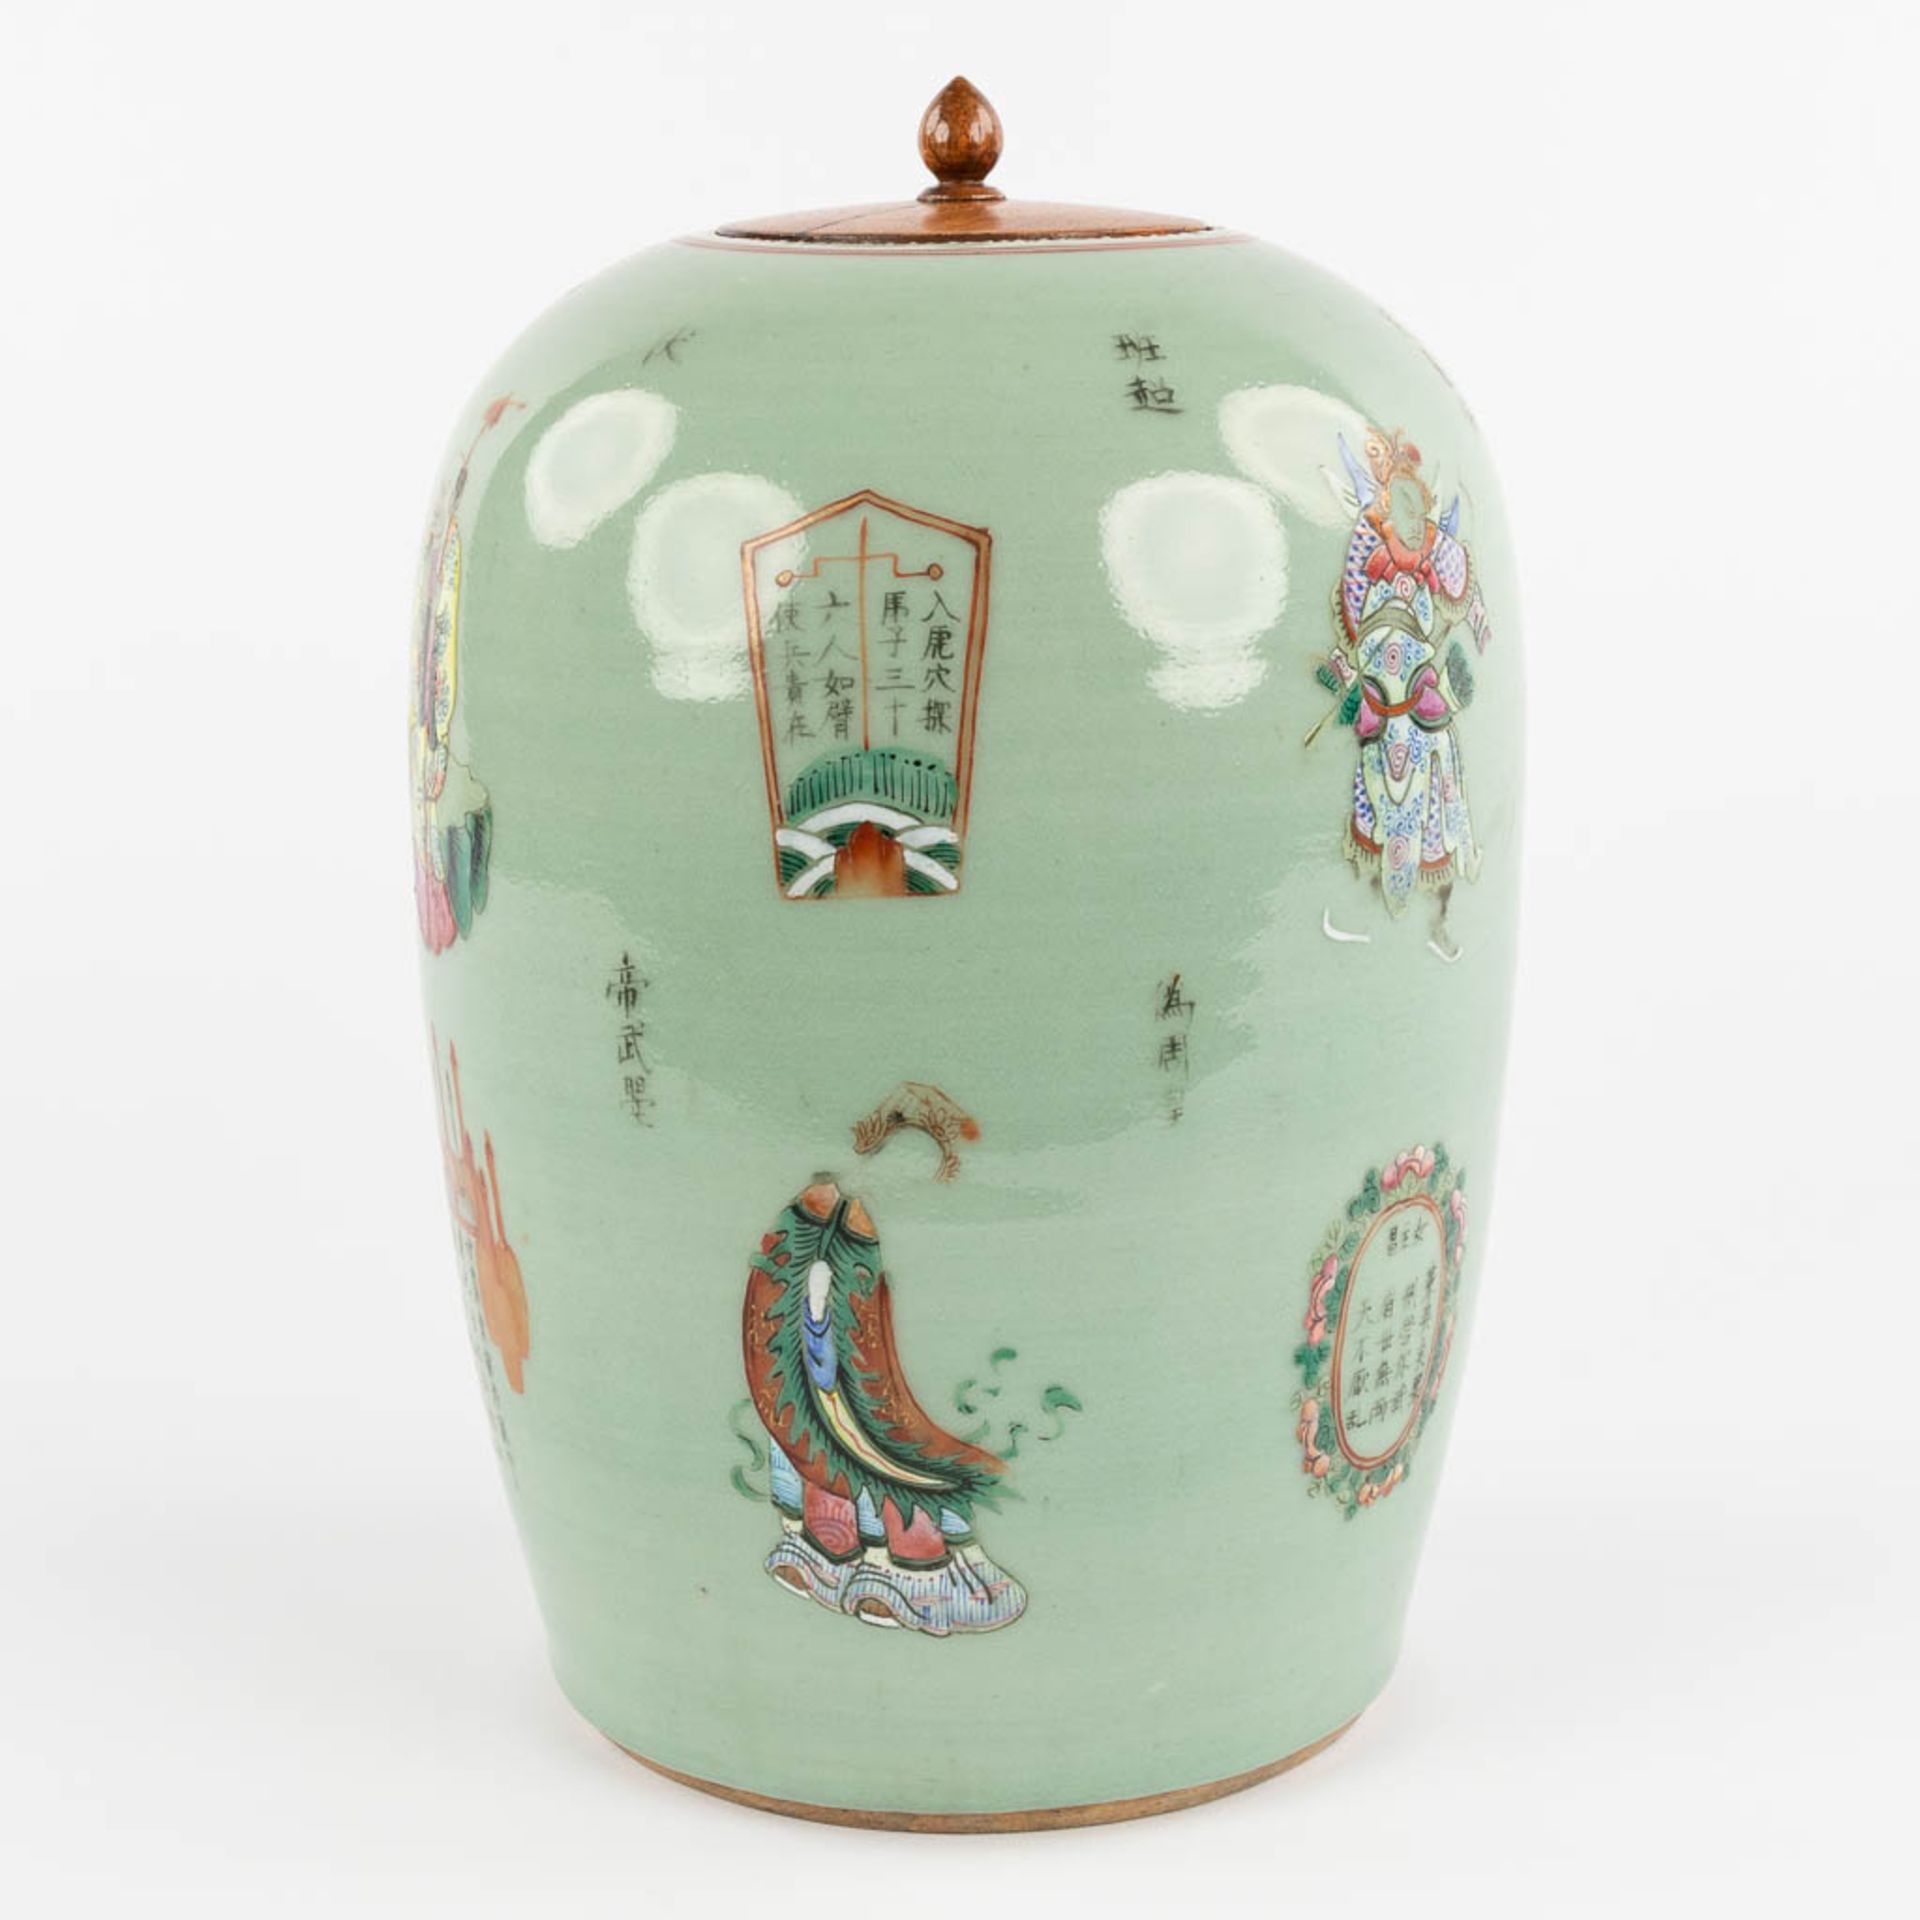 A Chinese Celadon ground ginger jar, decorated with warriors, calligraphy, and mythological figurine - Image 7 of 16